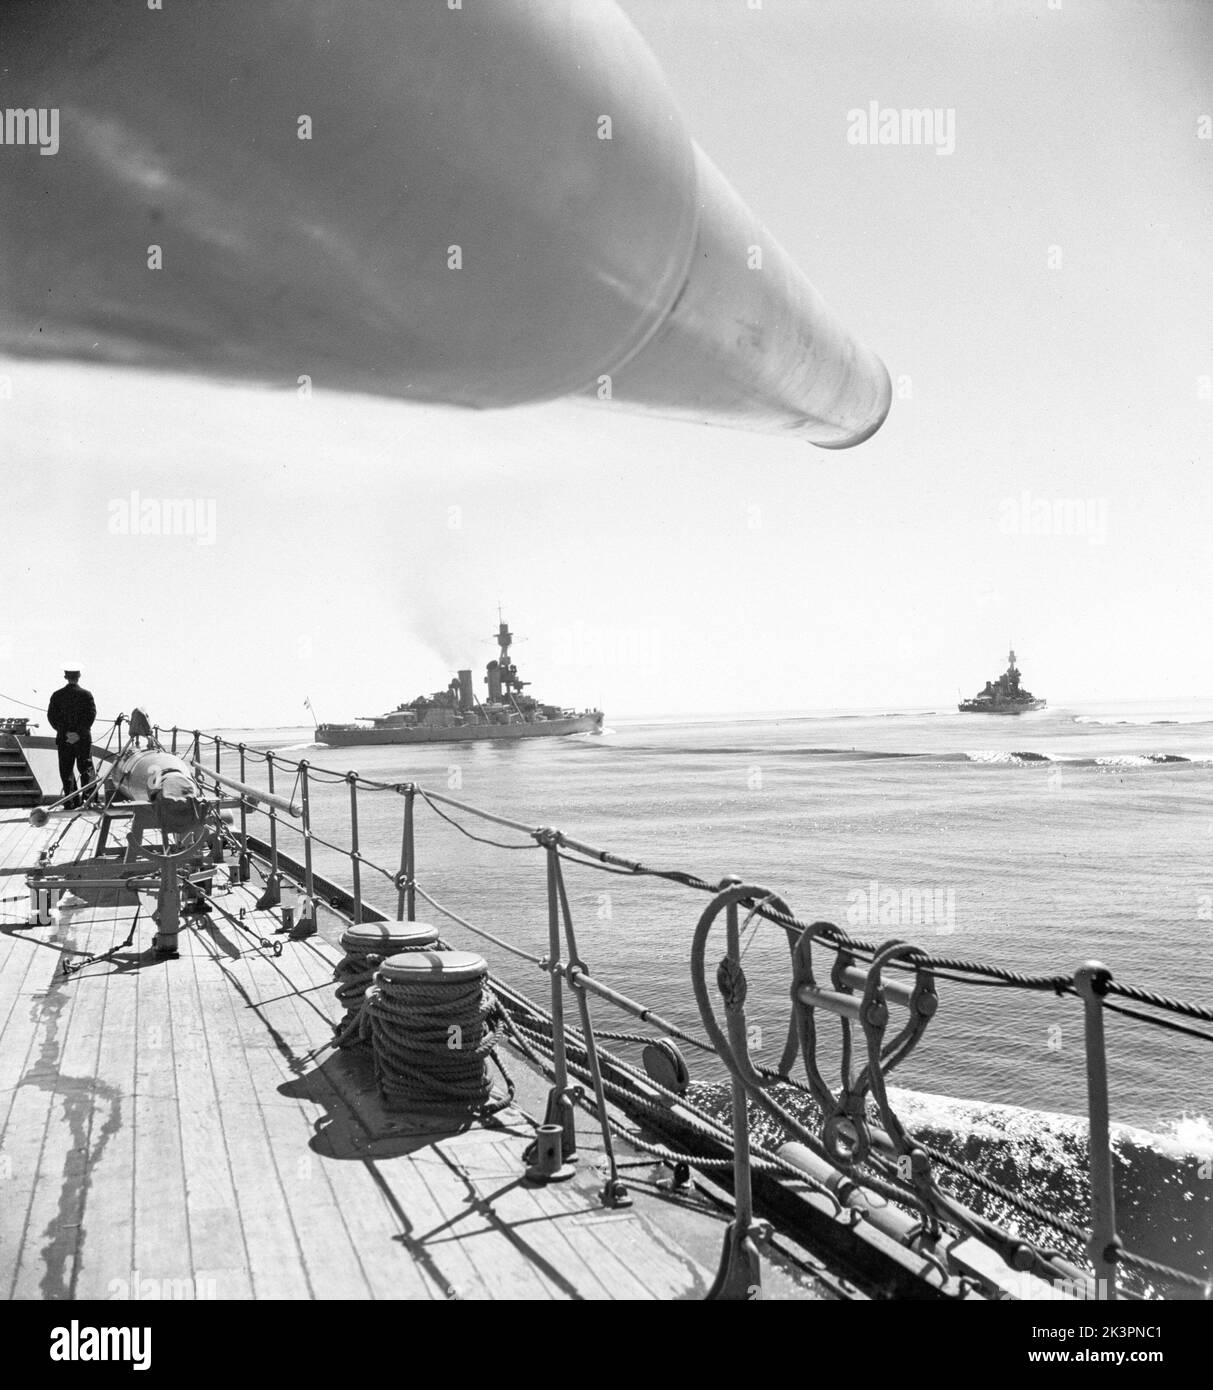 During World war II. The war ship Sverige during navy exercises at sea. The front cannons are visible with other swedish warships visible in the background. Sweden june 1940. Kristoffersson ref 141 Stock Photo